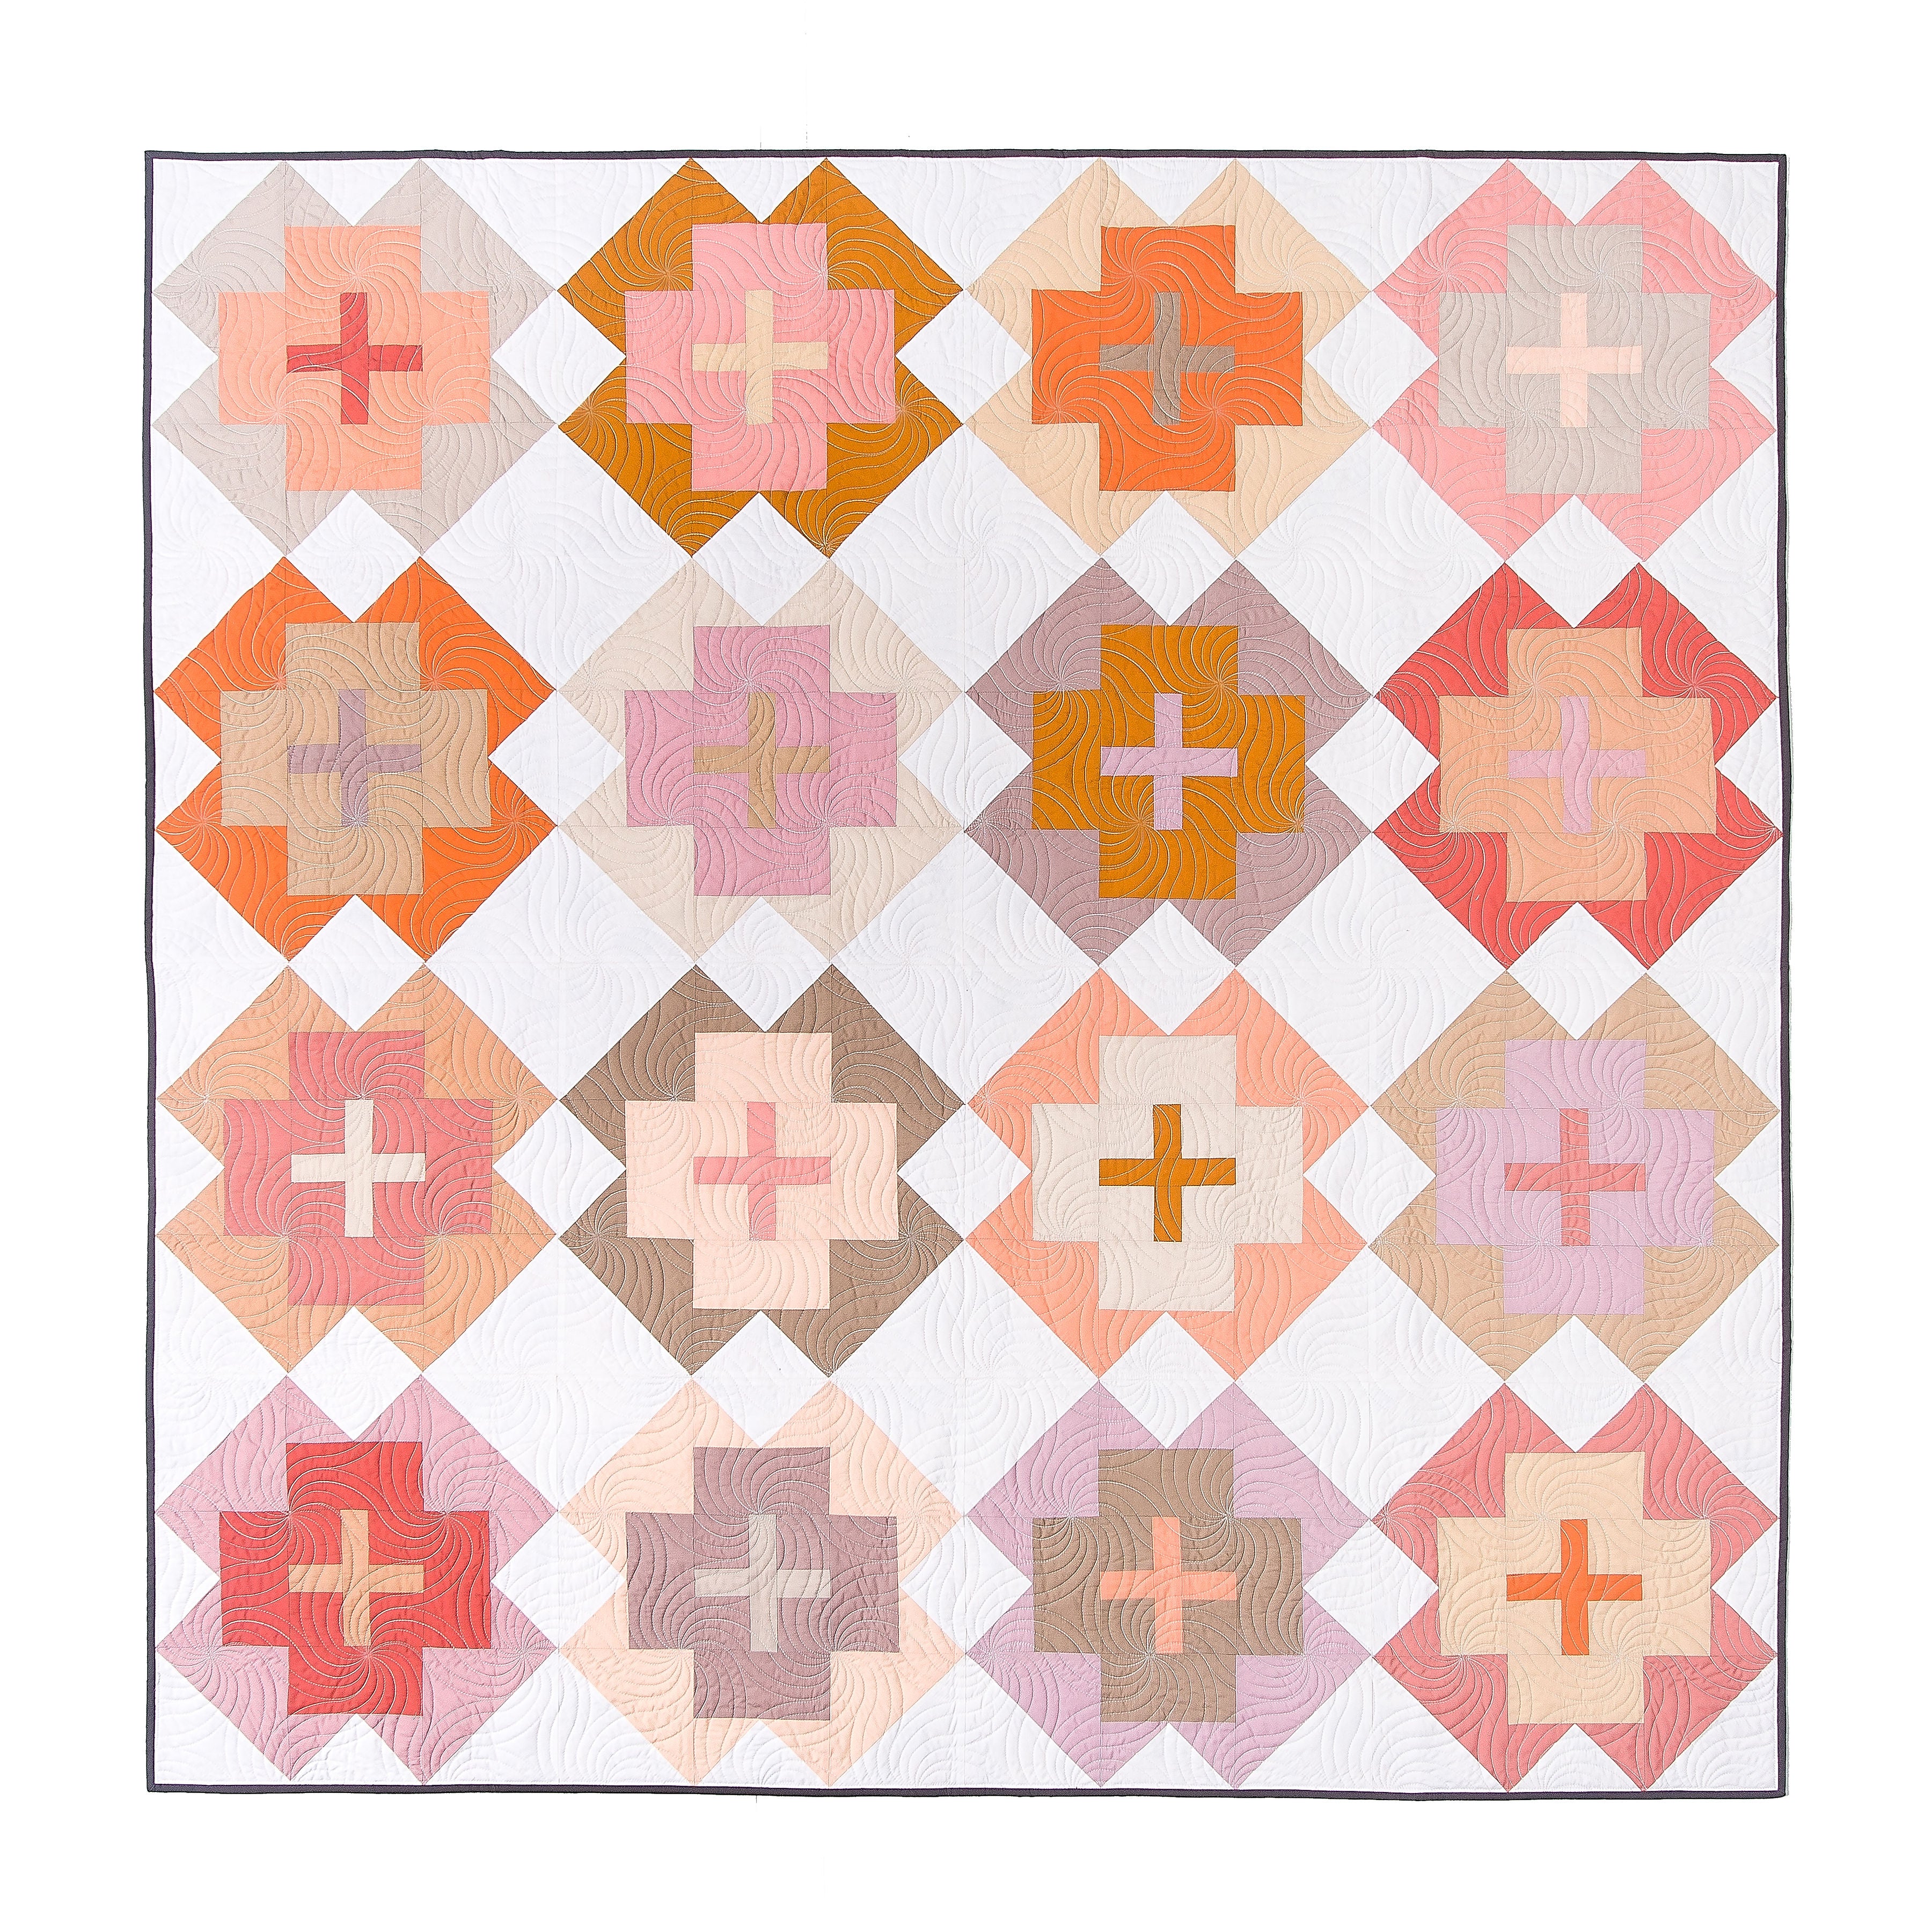 Nightingale Quilt Pattern - all the details!